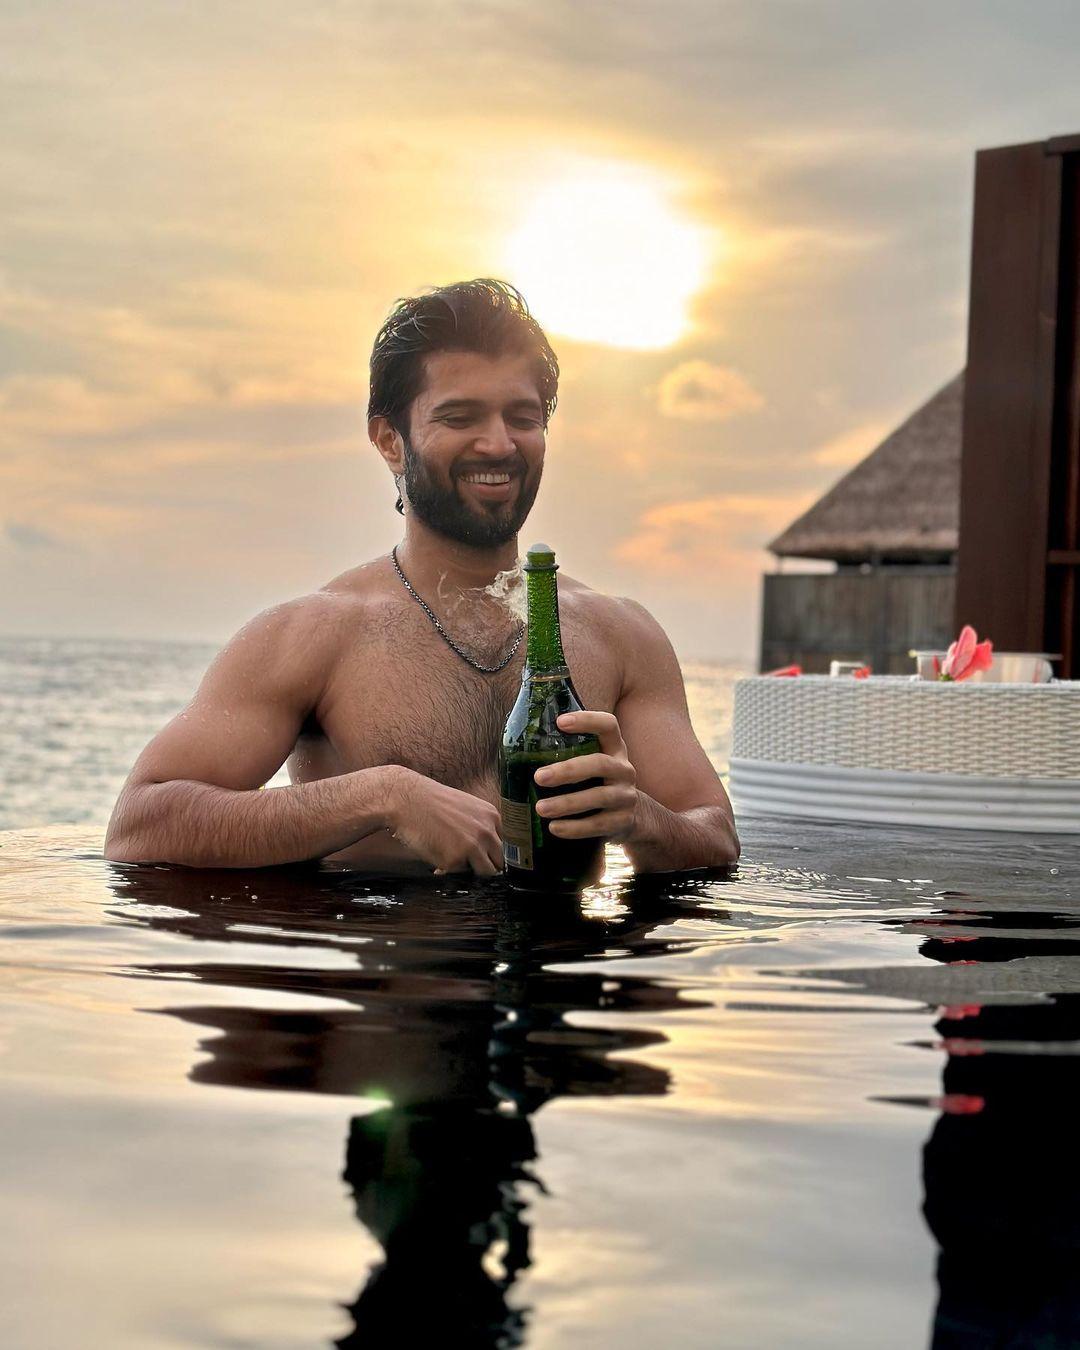 Vijay Deverakonda's laid-back summer vibe is on full display as he enjoys a carefree moment poolside, shirtless and relaxed. 